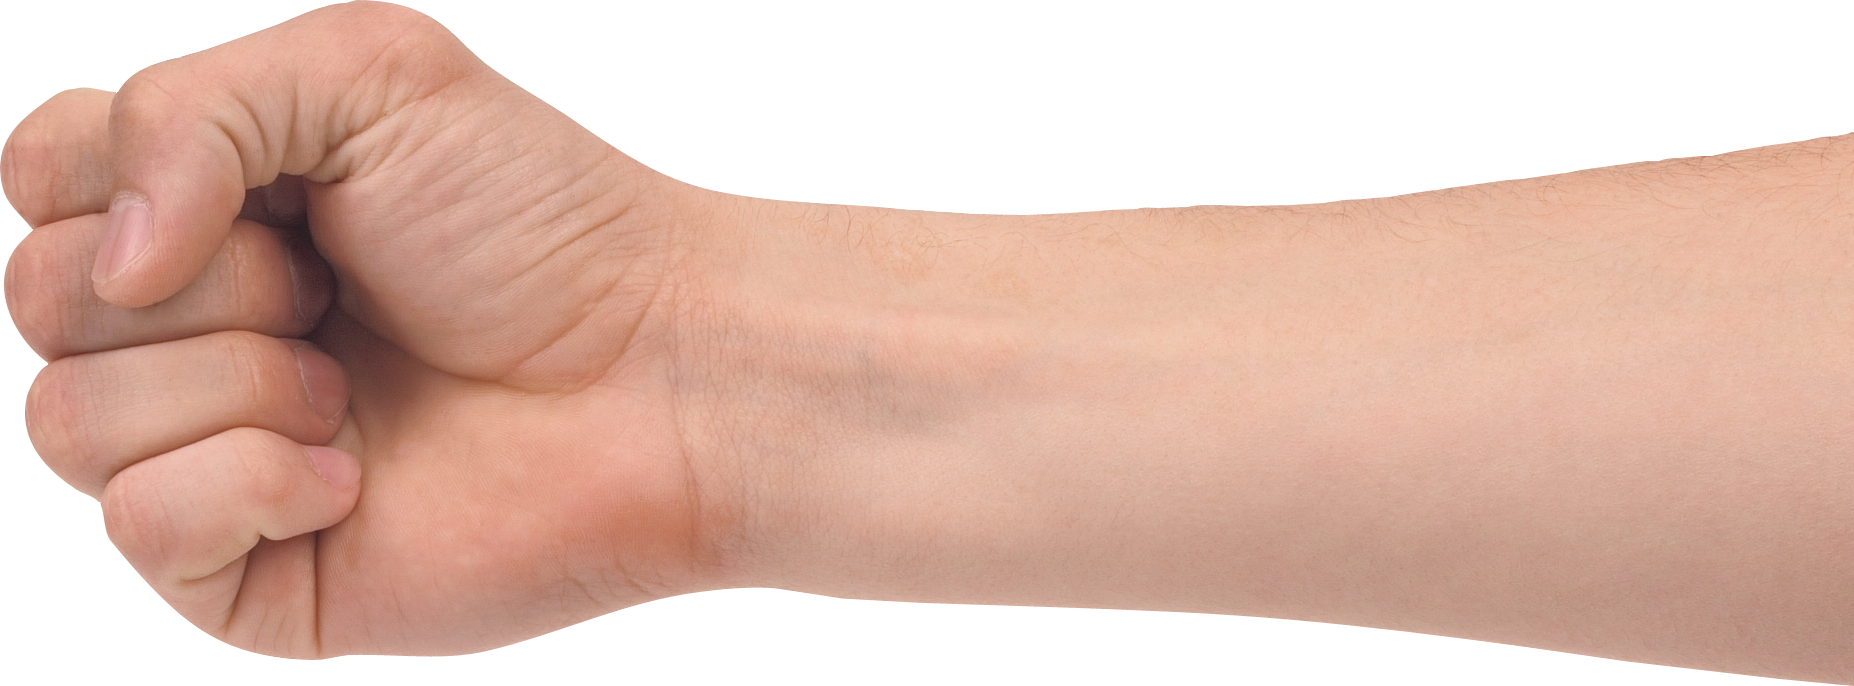 Hand clipart forearm. Hands png image purepng